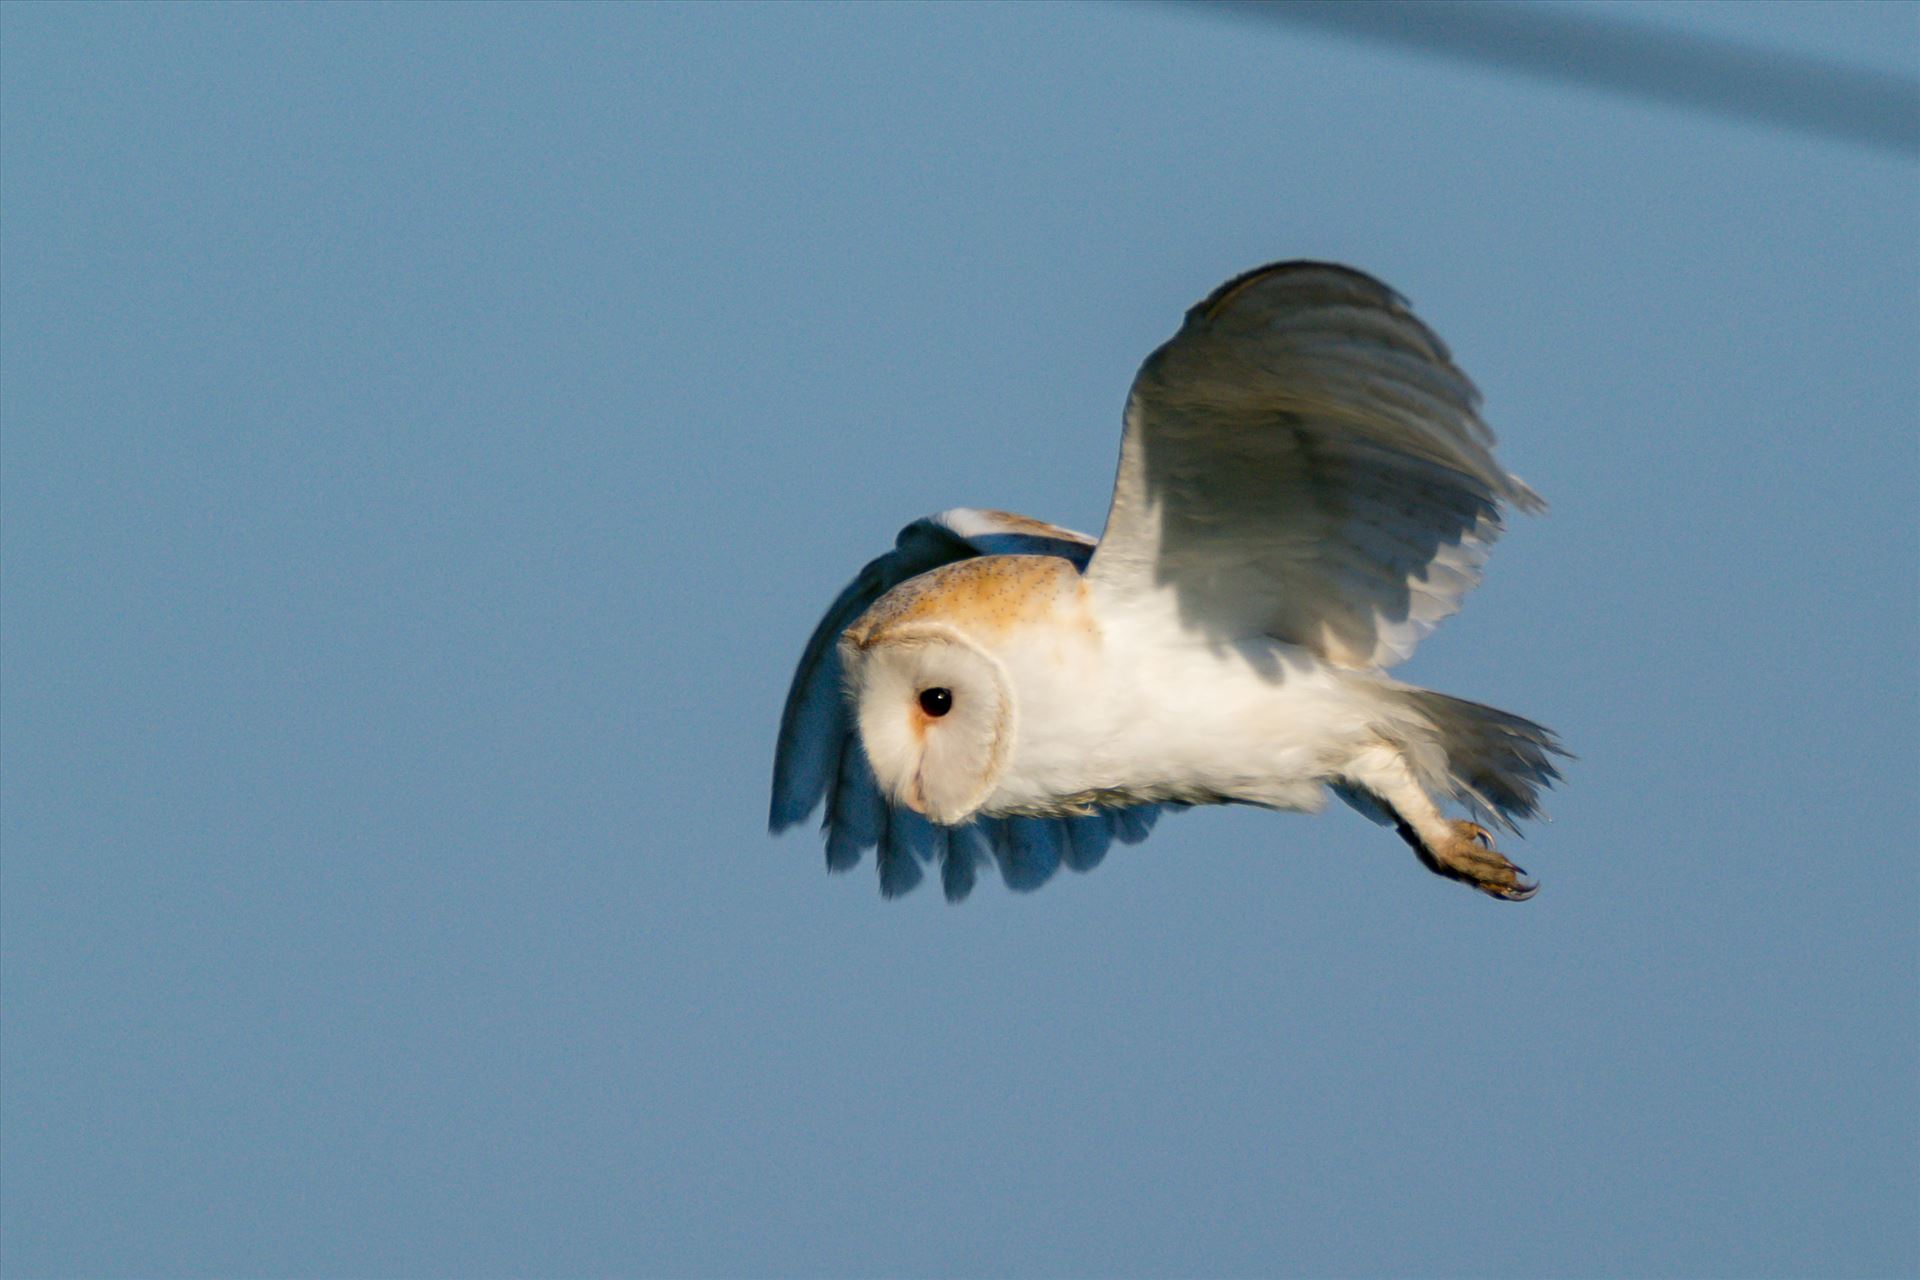 Barn Owl on the hunt 06 - A Barn Owl on the hunt for its breakfast by AJ Stoves Photography